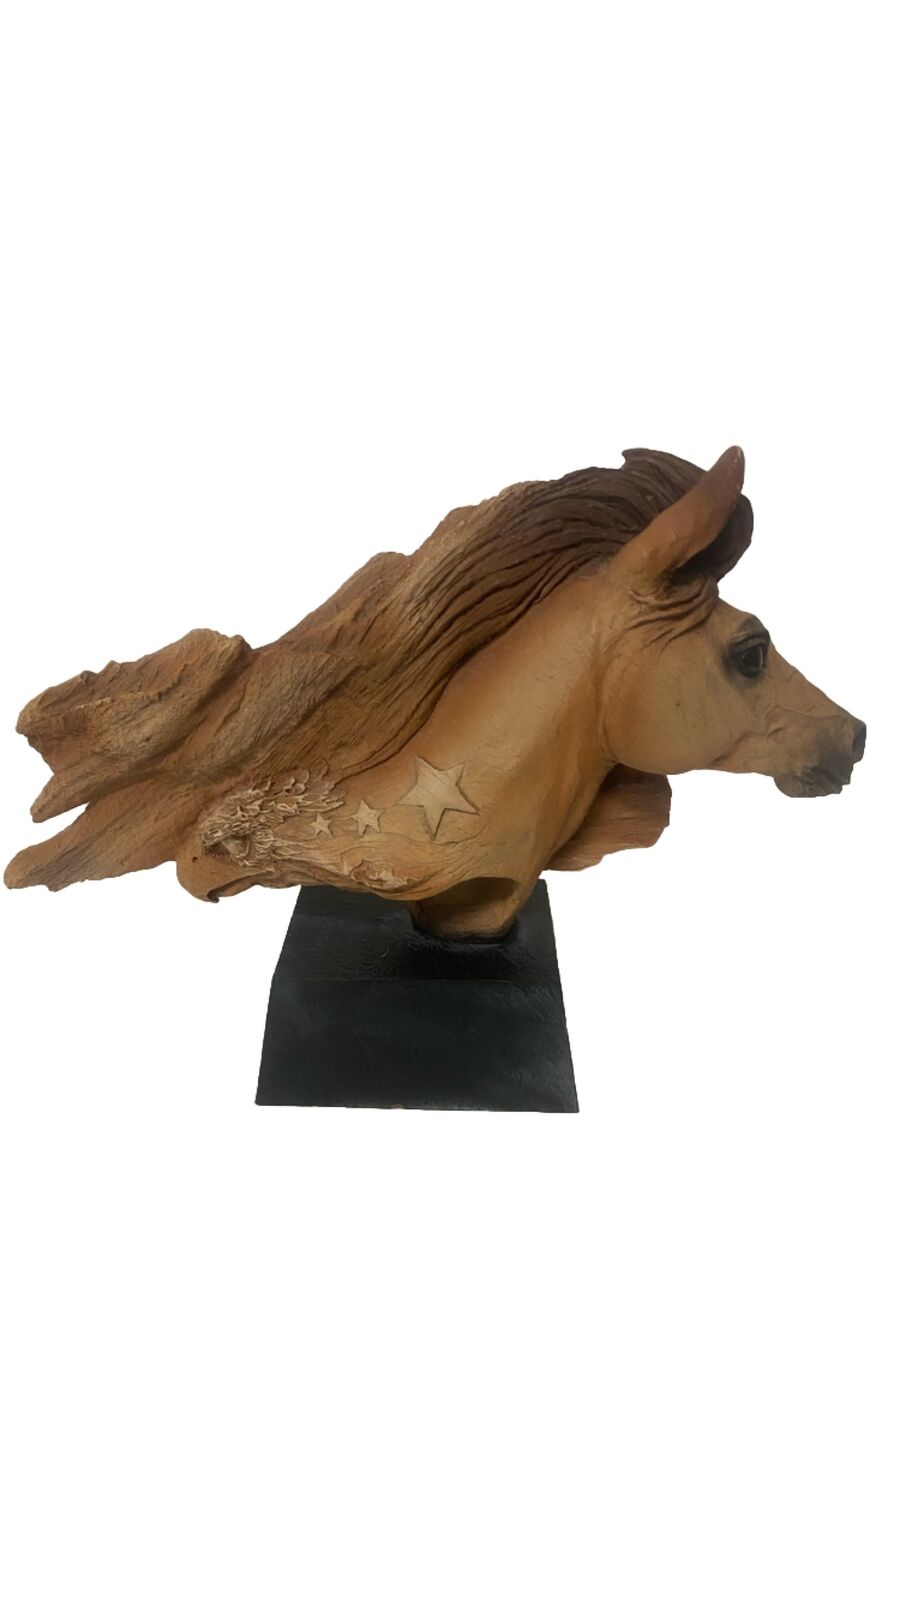 1996 Rick Cain Limited Driftwood Riding Horse Statue & Bald Eagle Vintage